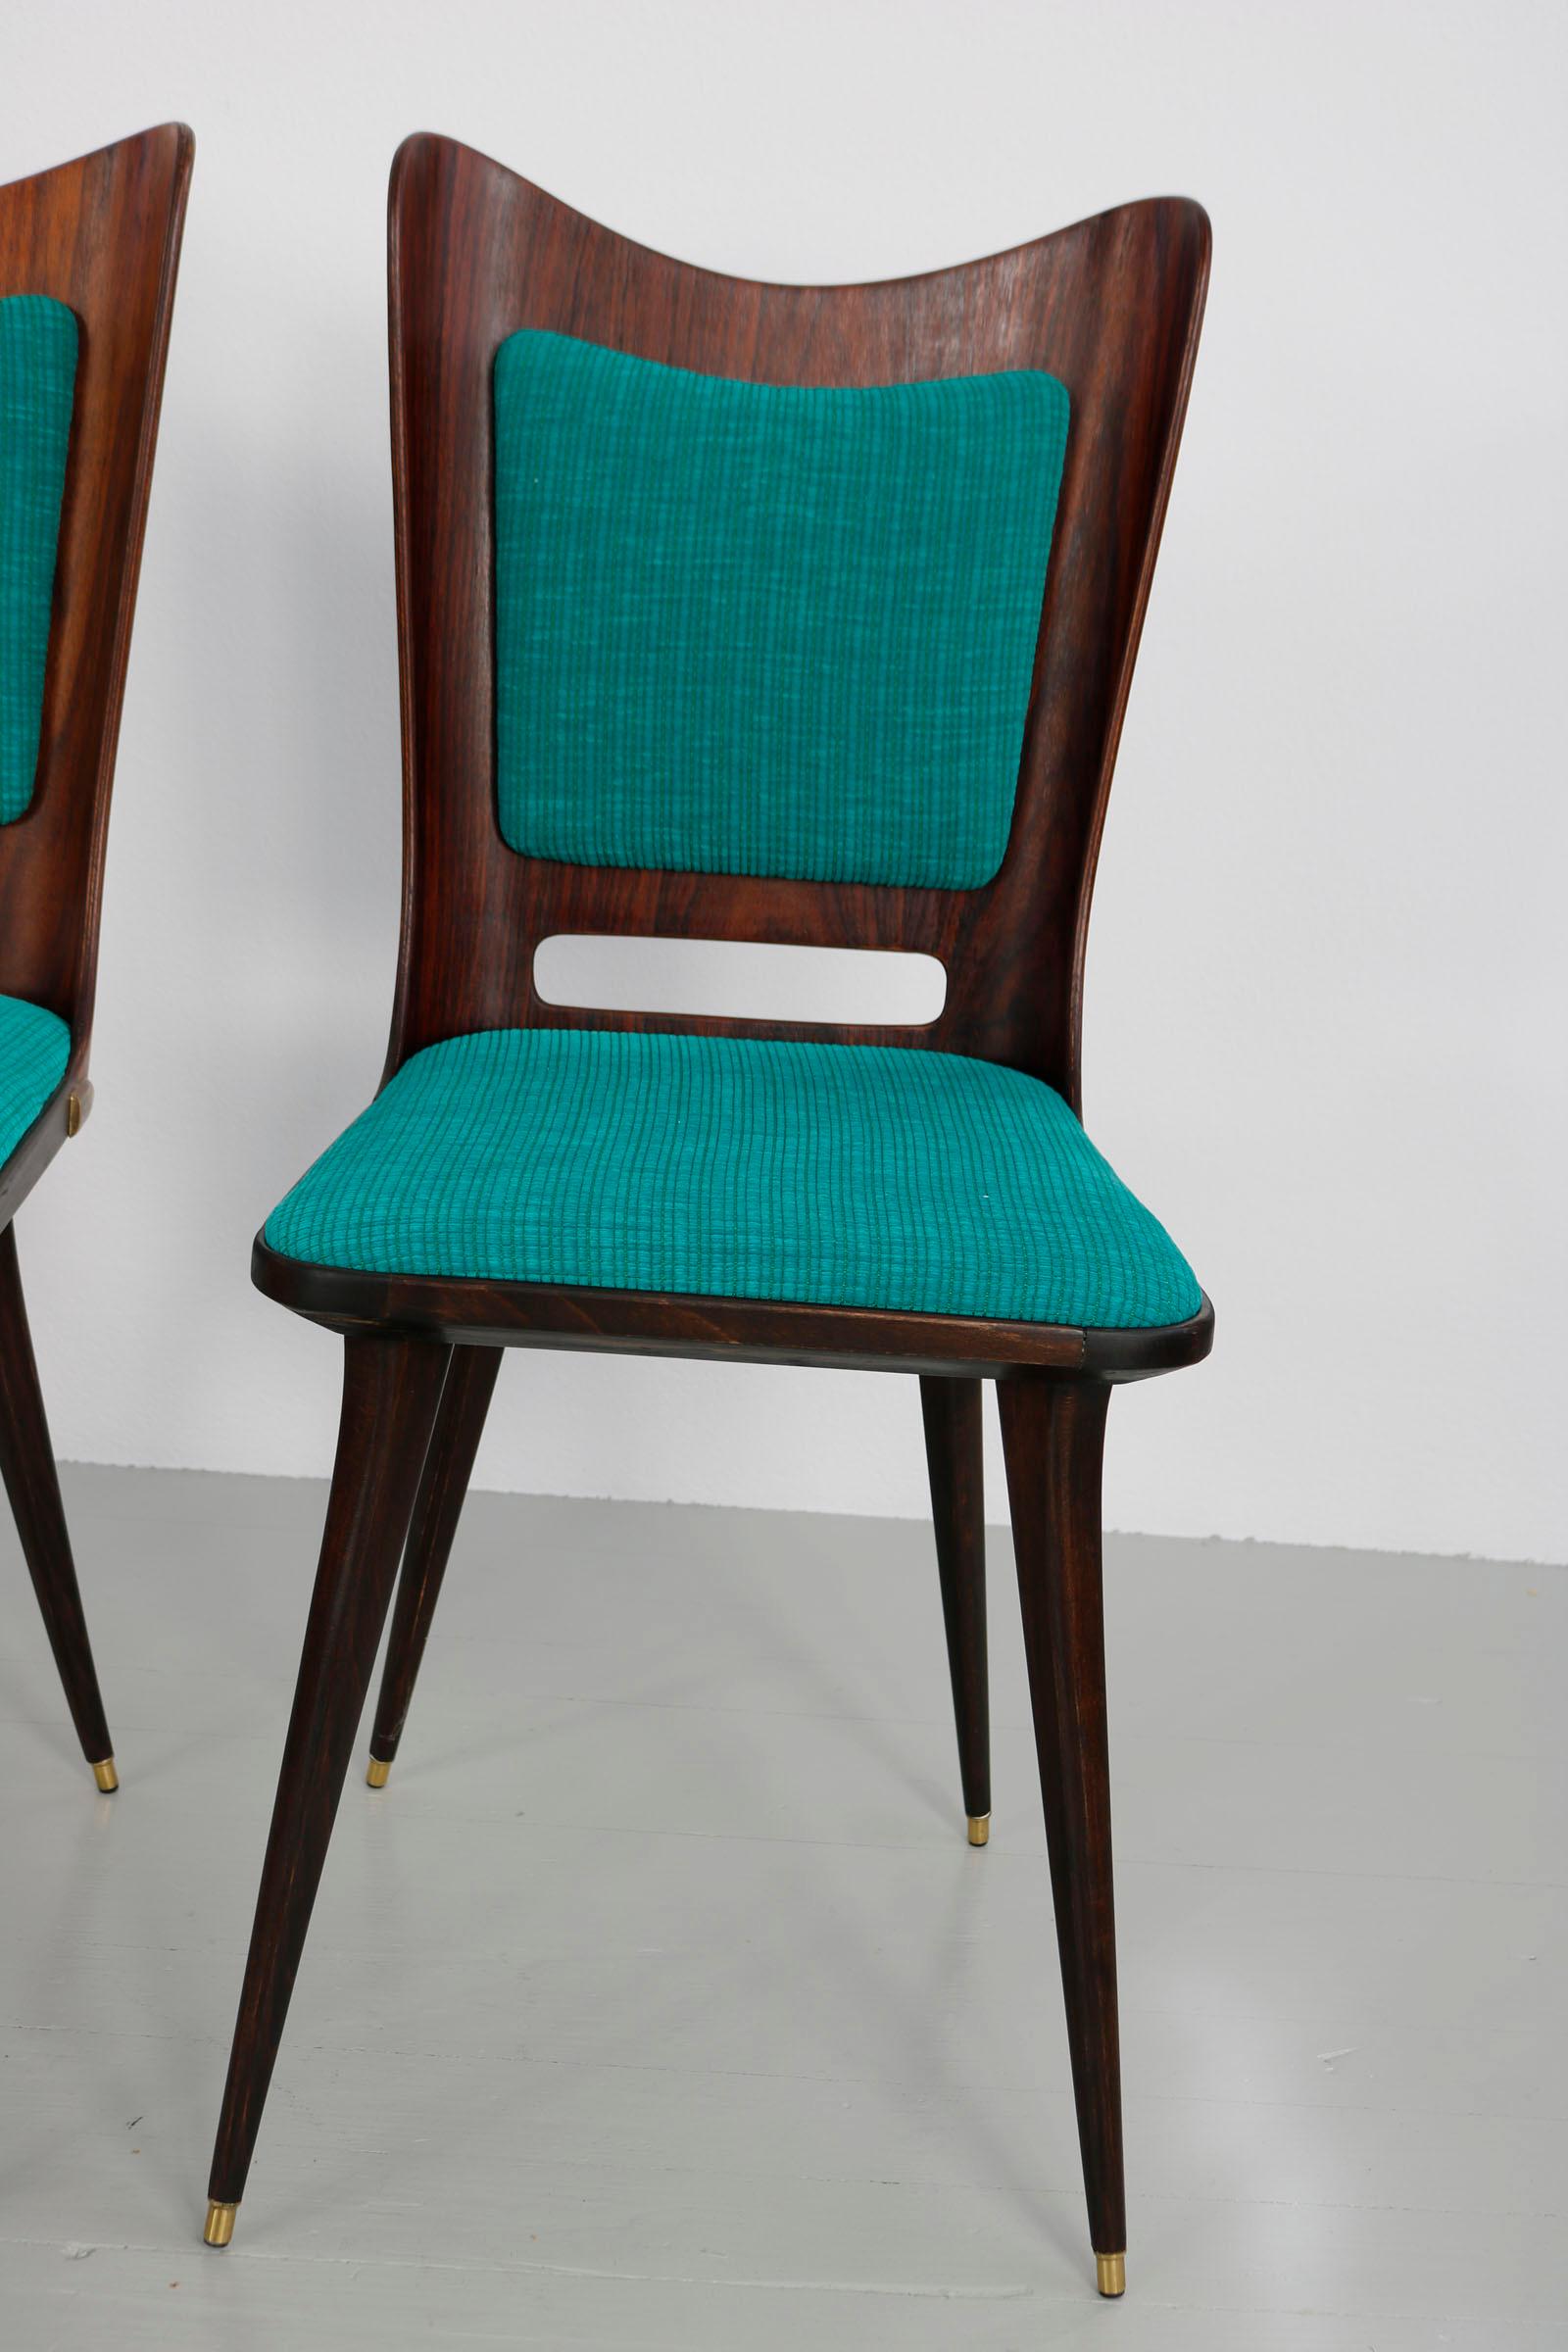 Set of Six Wooden Dining Chairs with Green Upholstery, 1950s For Sale 9